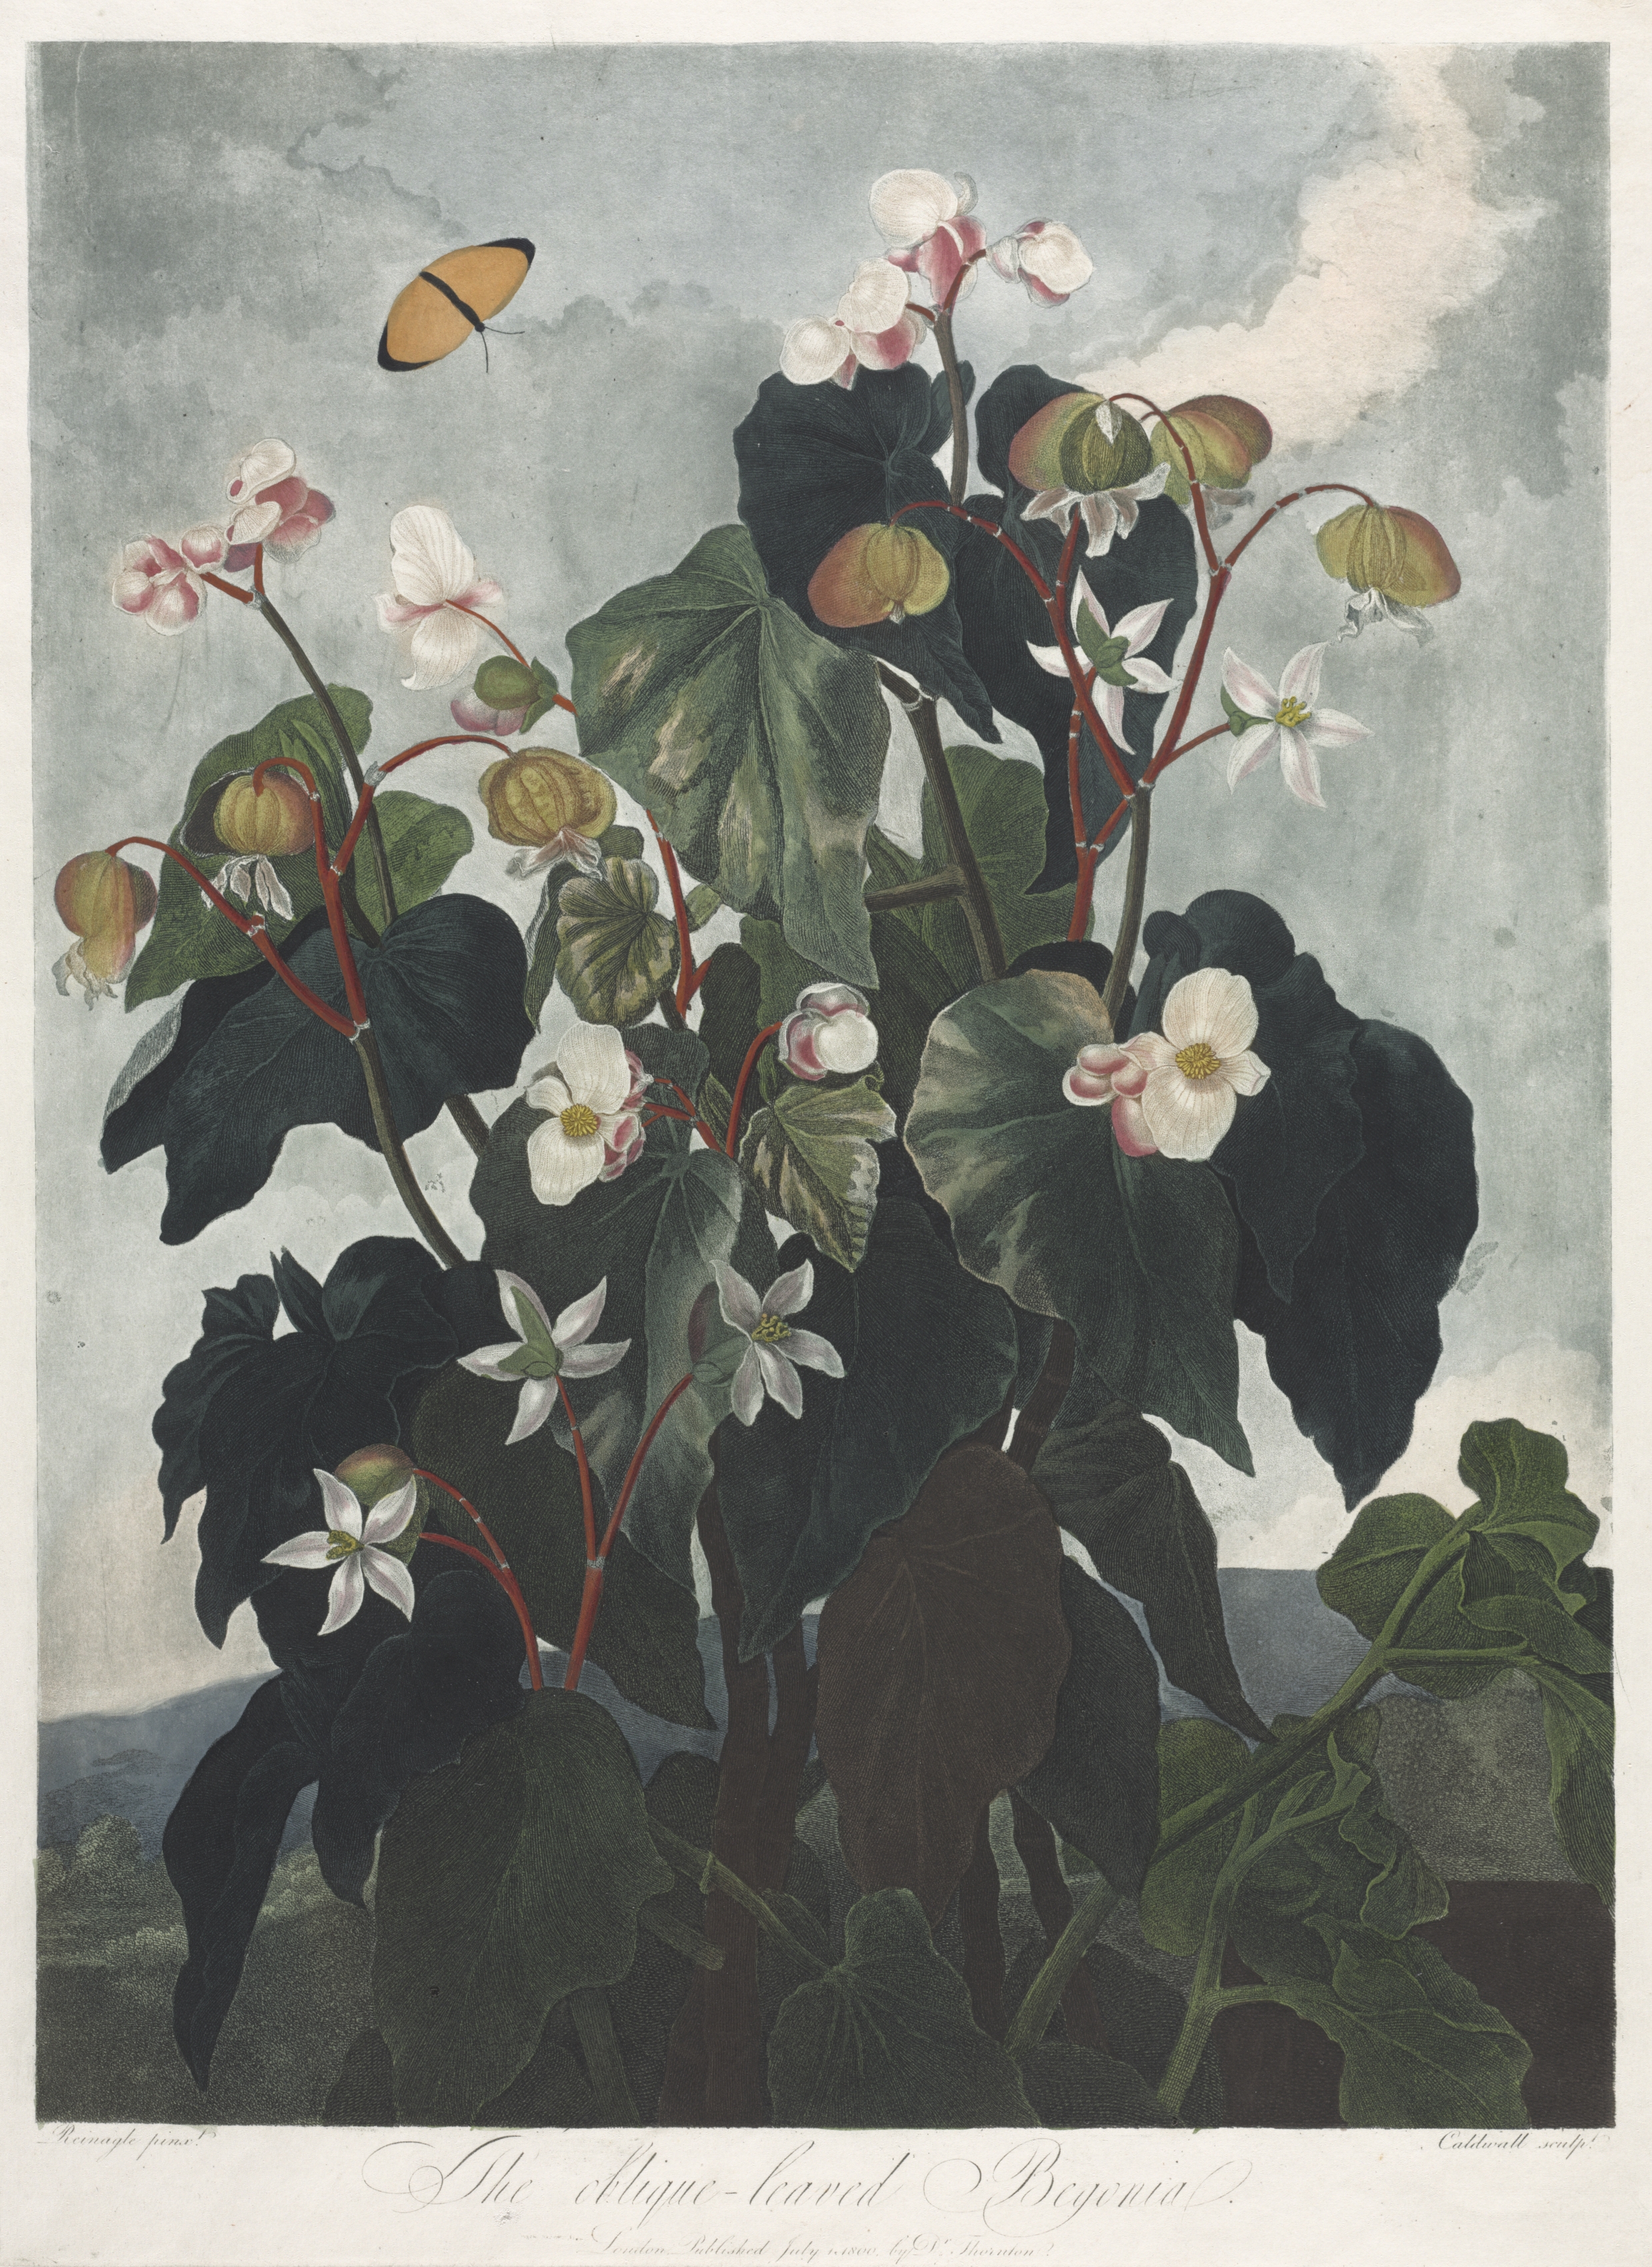 The Temple of Flora, or Garden of Nature: The Obique-leaved Begonia